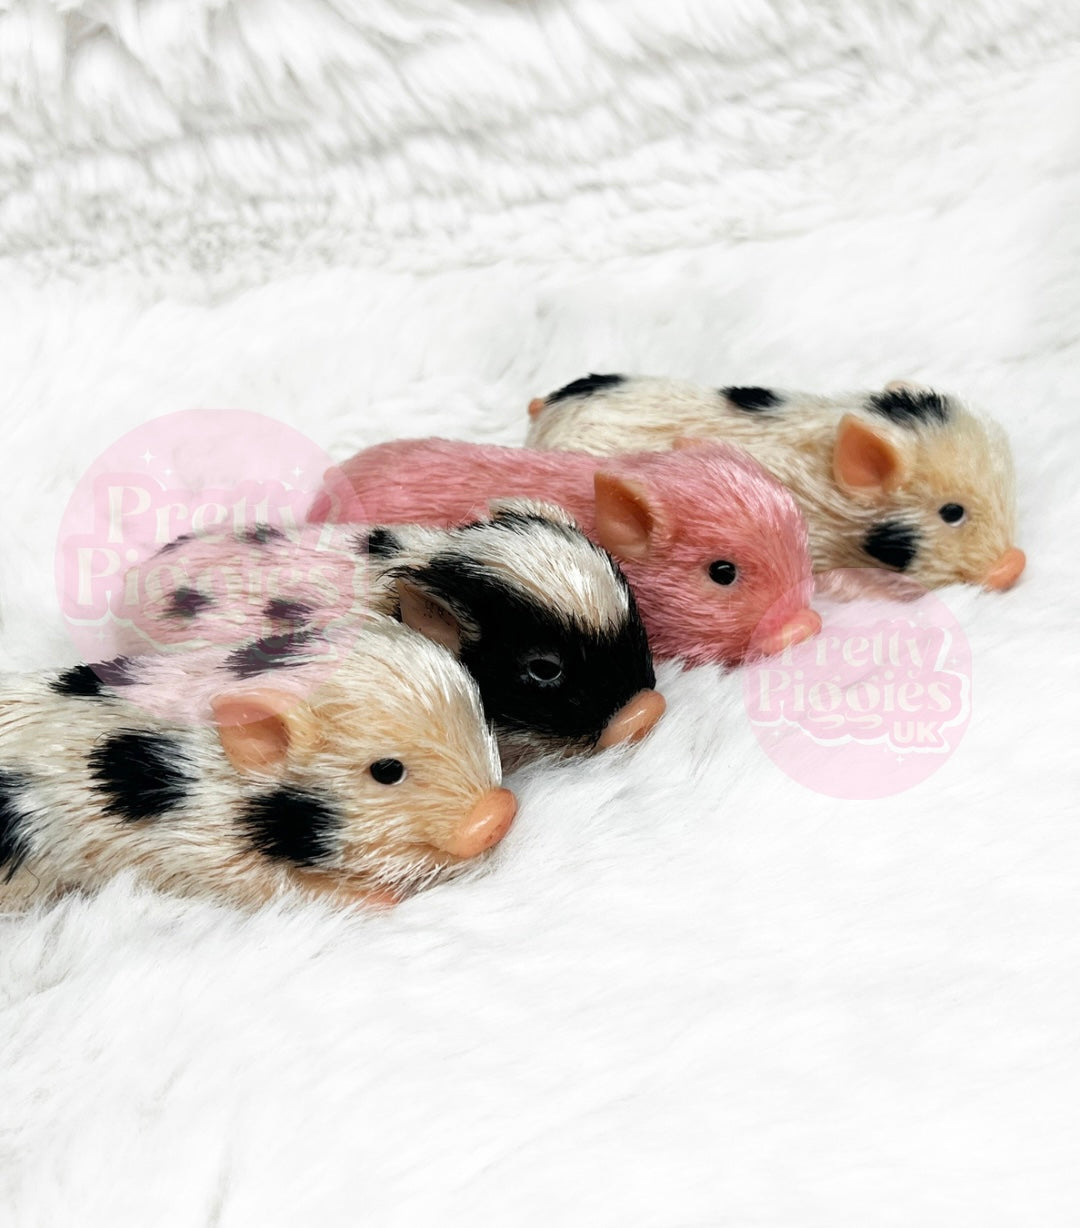 Micro Piglets - Reborn silicone micro piglets available